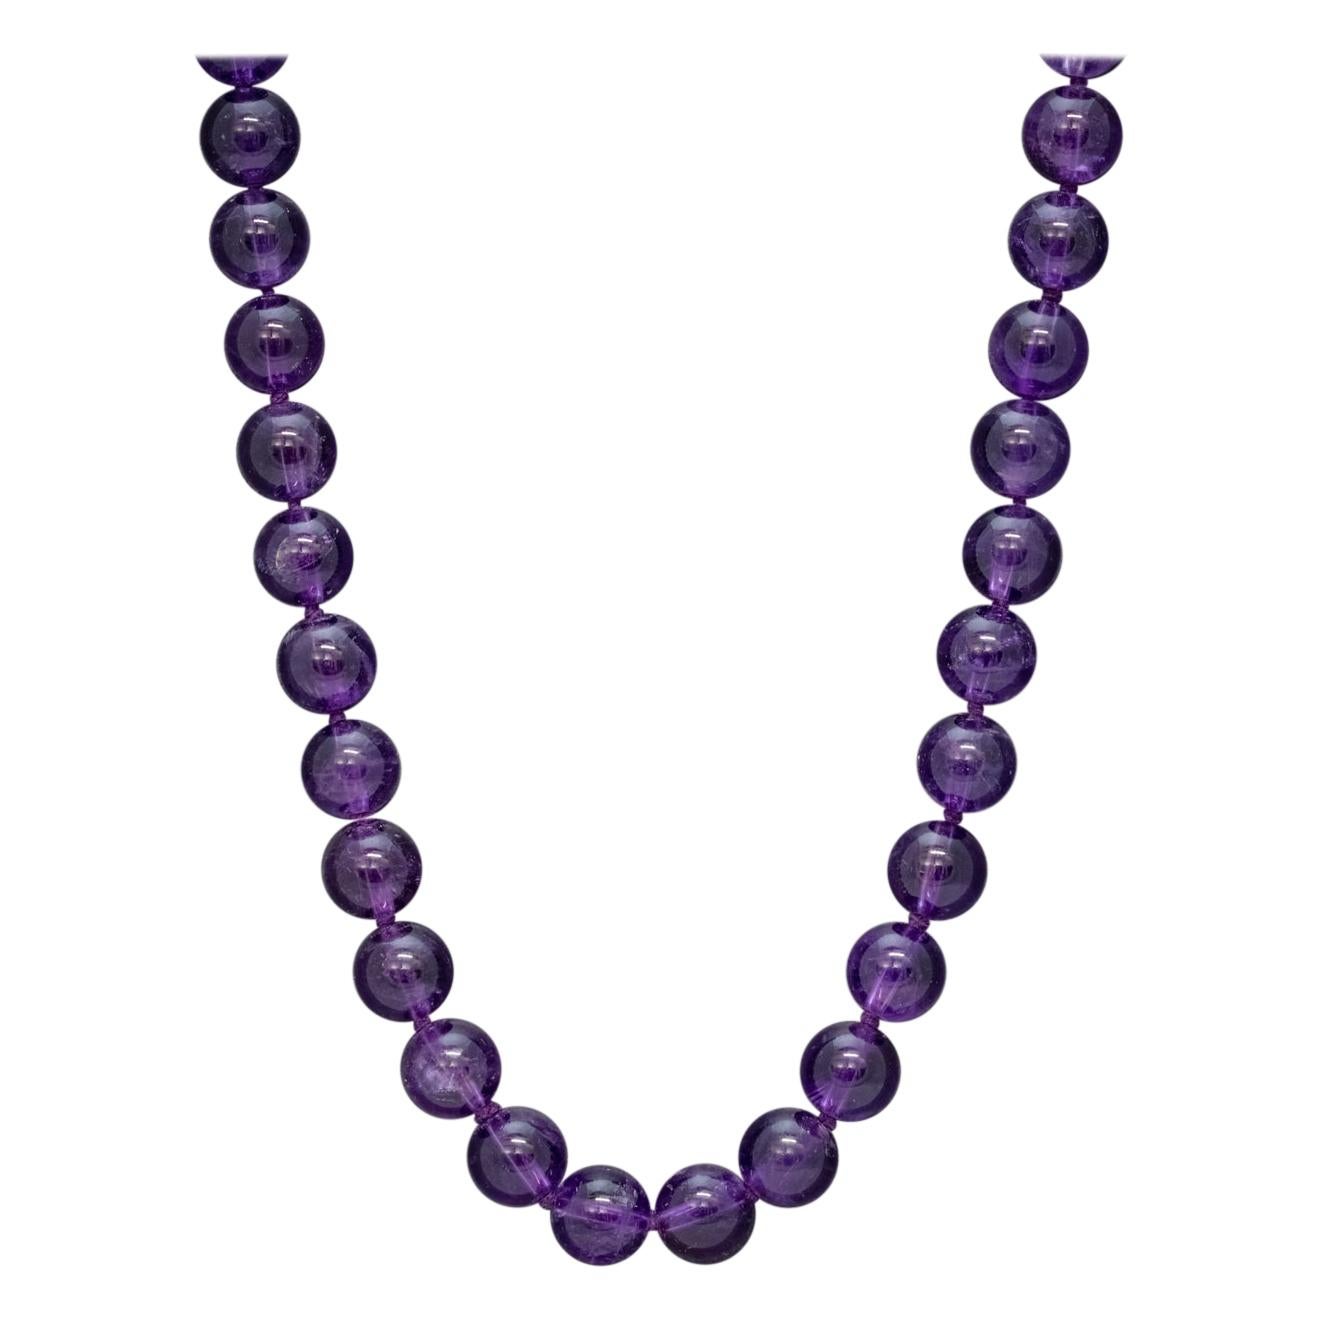 Antique Victorian Amethyst Necklace 18 Carat Gold Clasp, circa 1900 For Sale